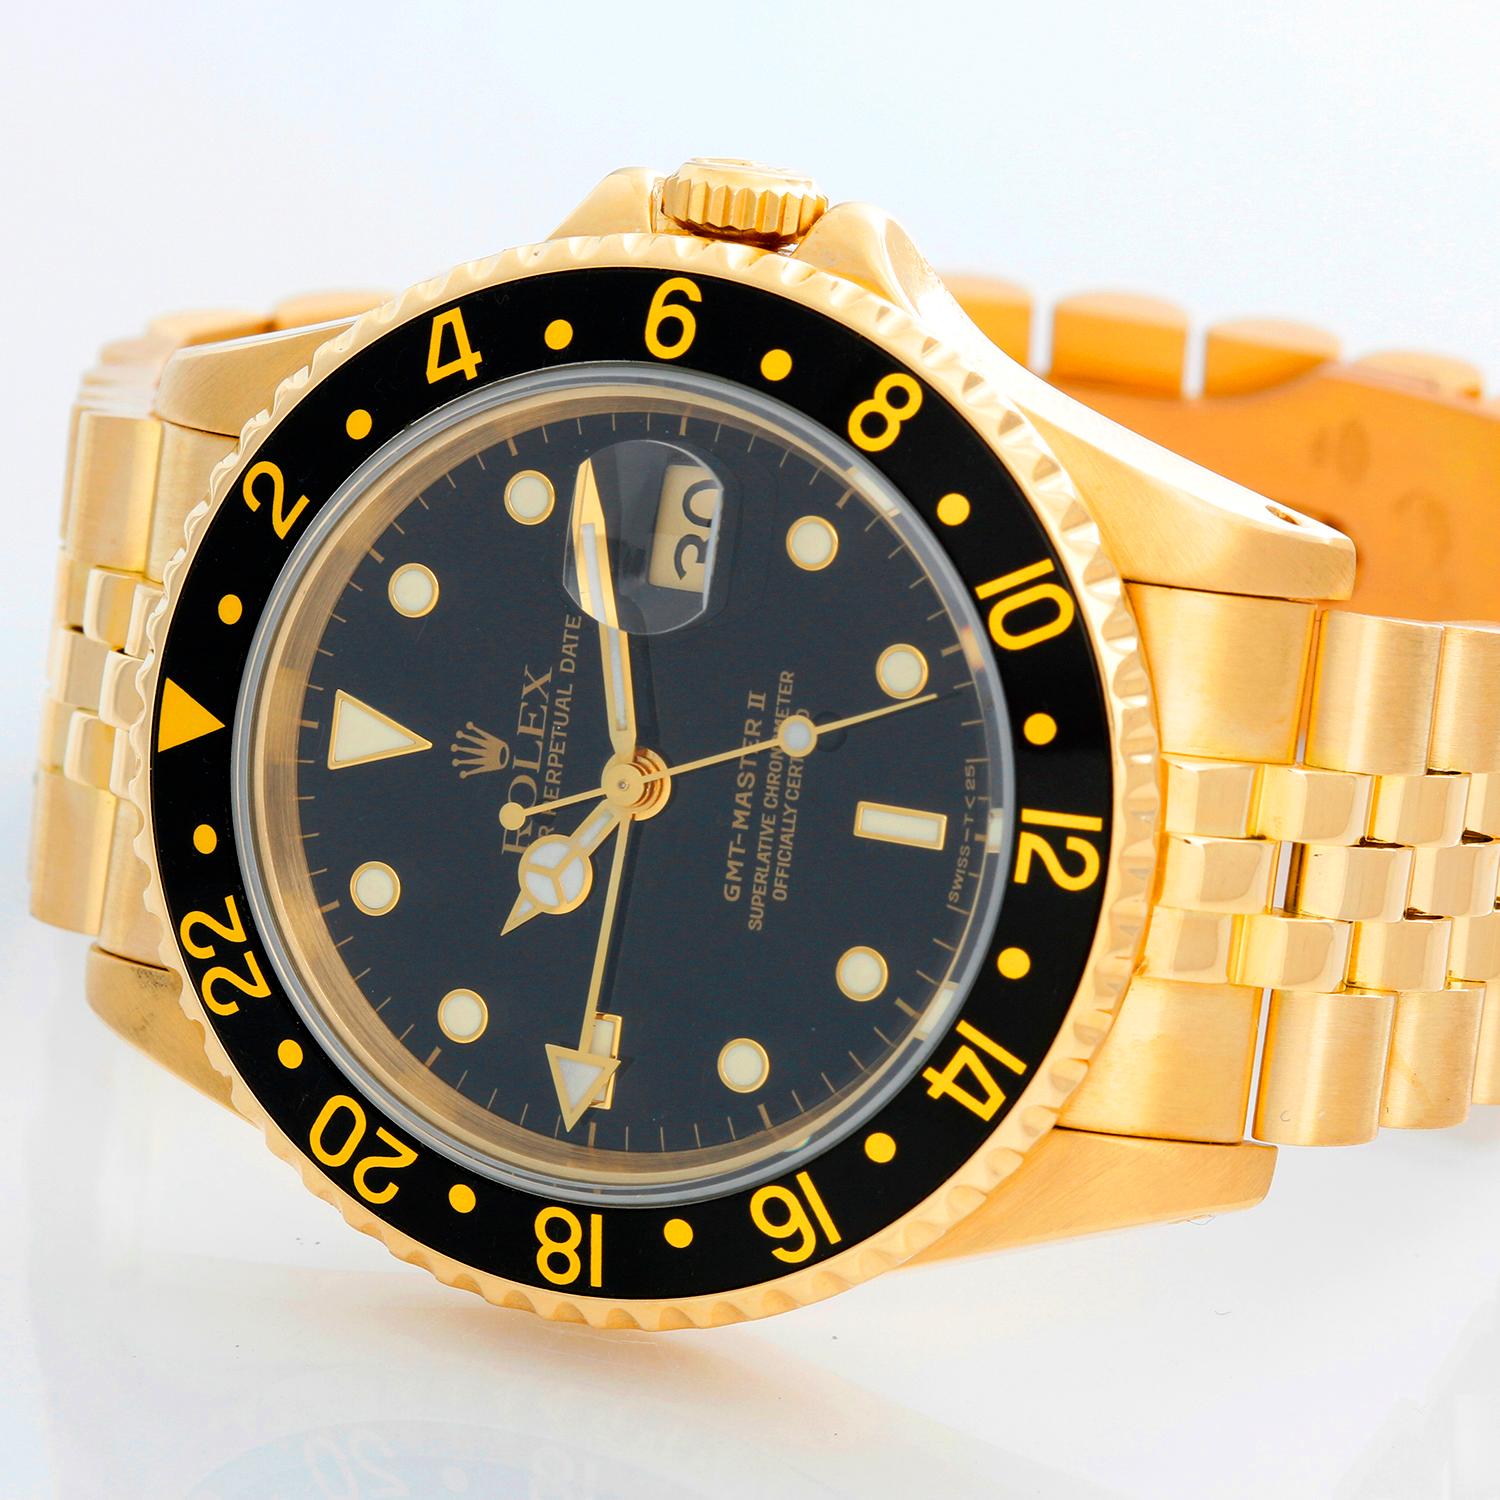 Rolex GMT - Master II 18K Yellow Gold Men's Watch 16718 - Automatic winding, 31 jewels, Quickset, sapphire crystal. 18k yellow gold case with rotating bezel (40mm diameter). Black dial with luminous markers. 18k yellow gold Jubilee bracelet.